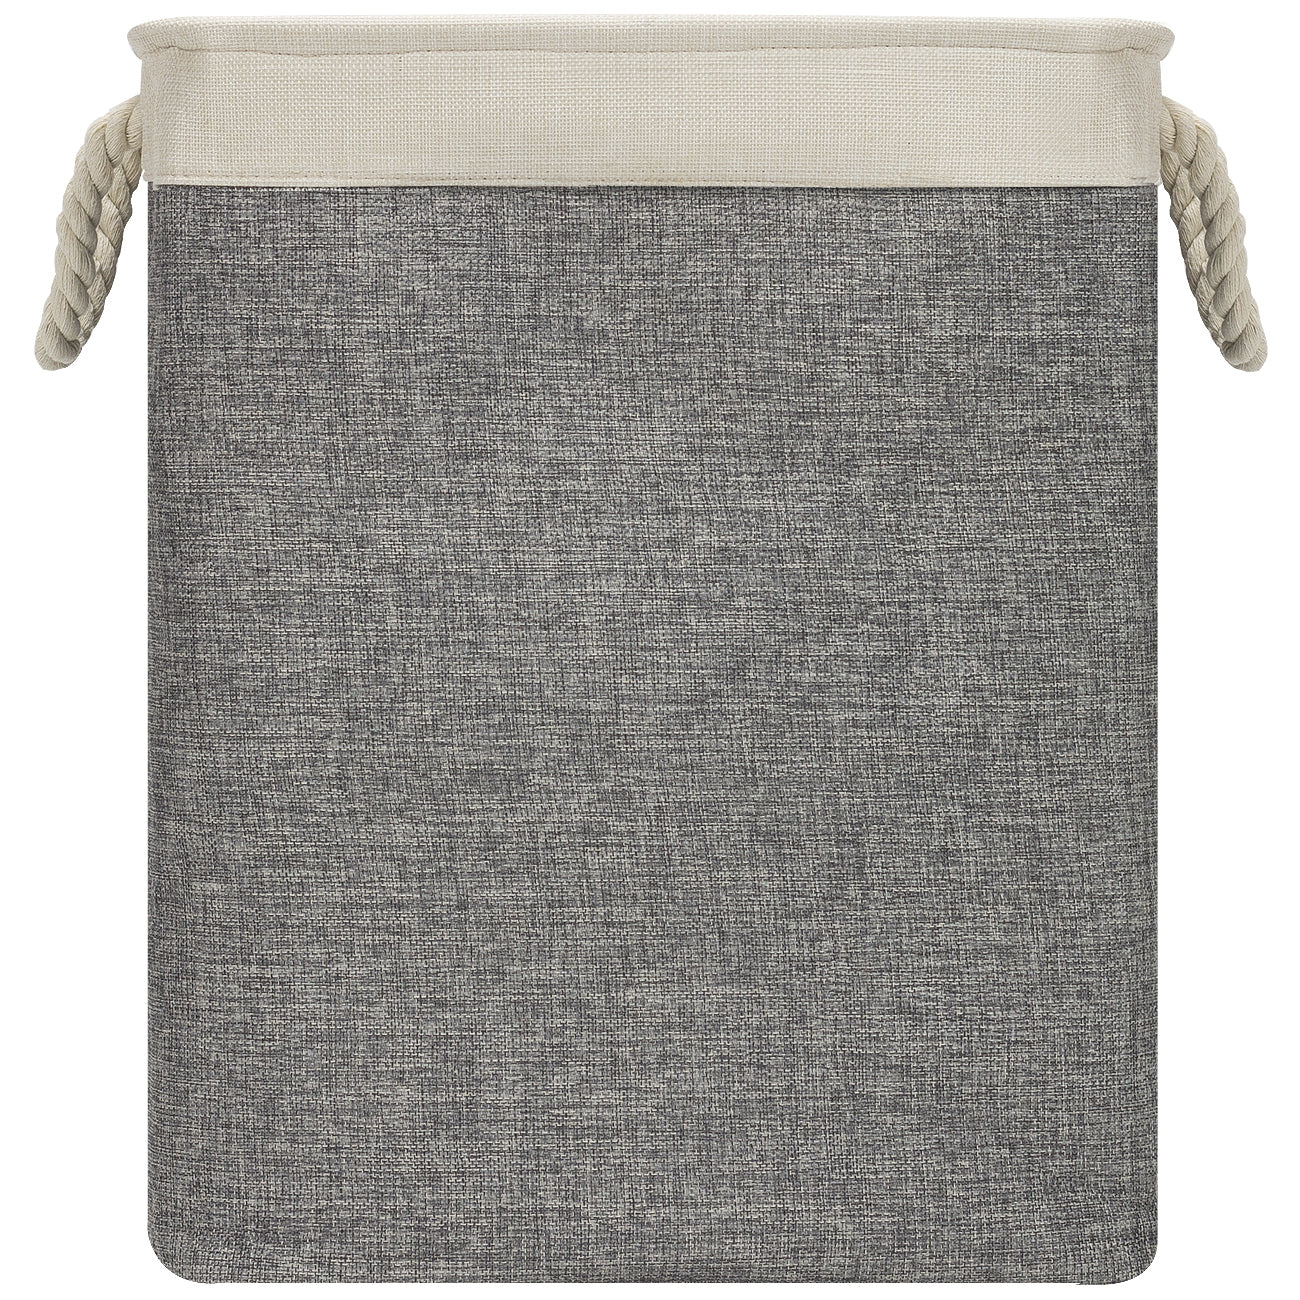 Laundry Hamper with Rope Handles - Sorbus Home